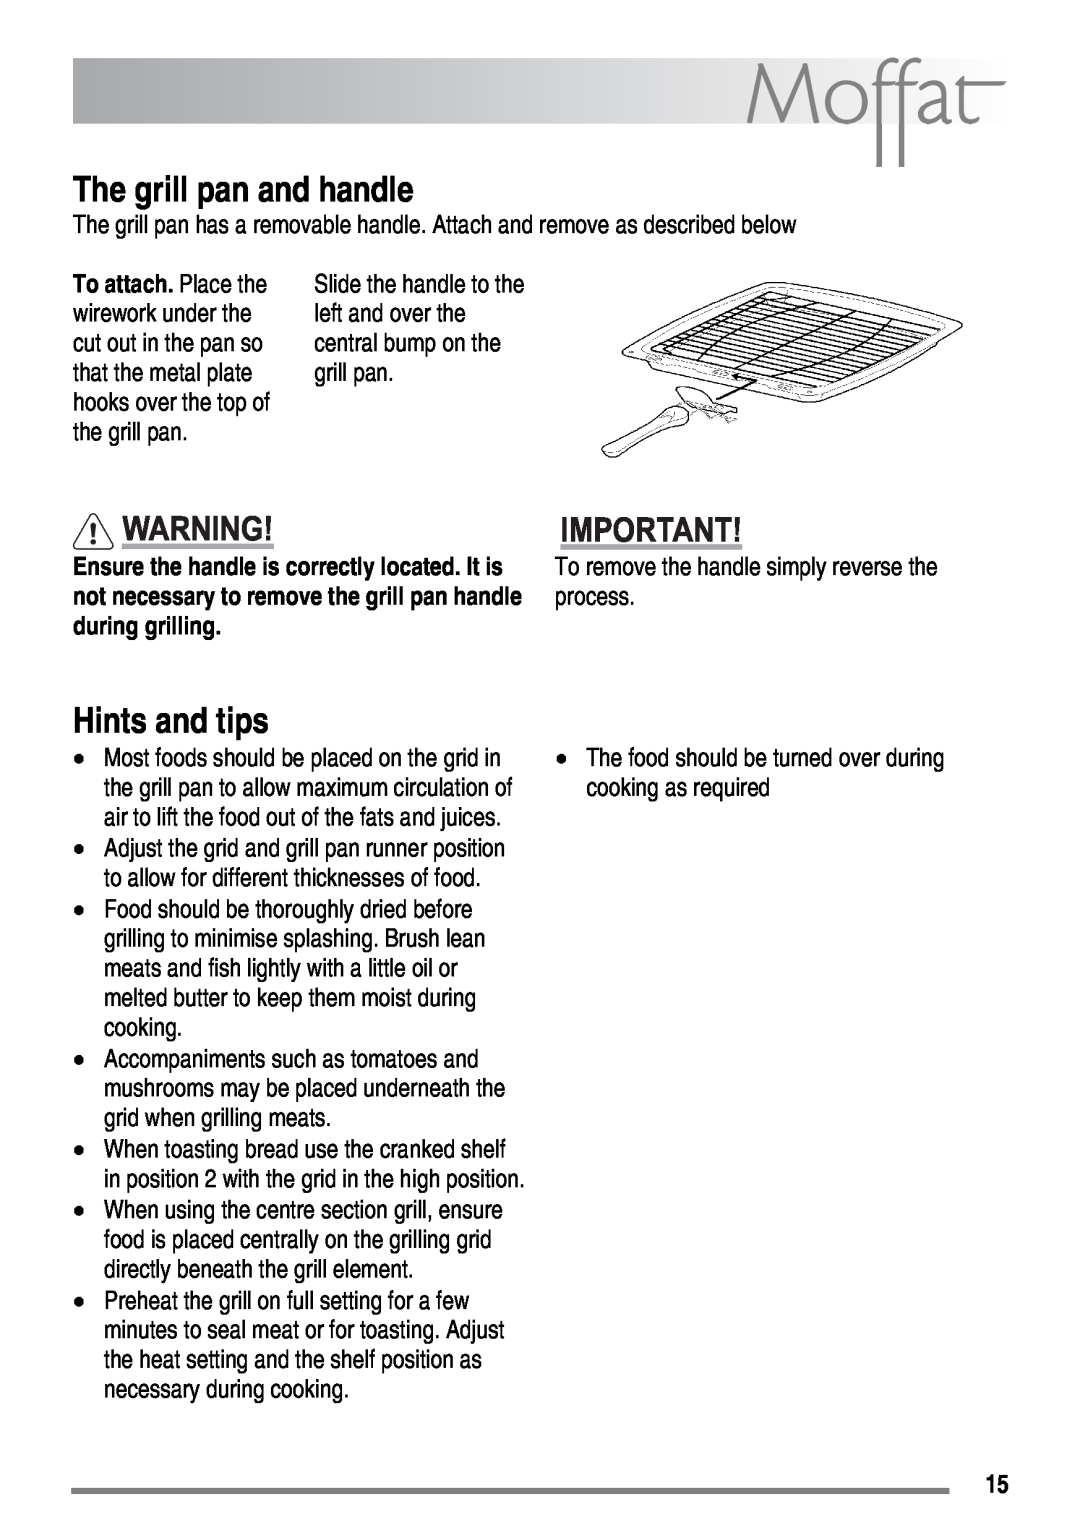 Moffat MDB900 user manual The grill pan and handle, Hints and tips, process, during grilling 